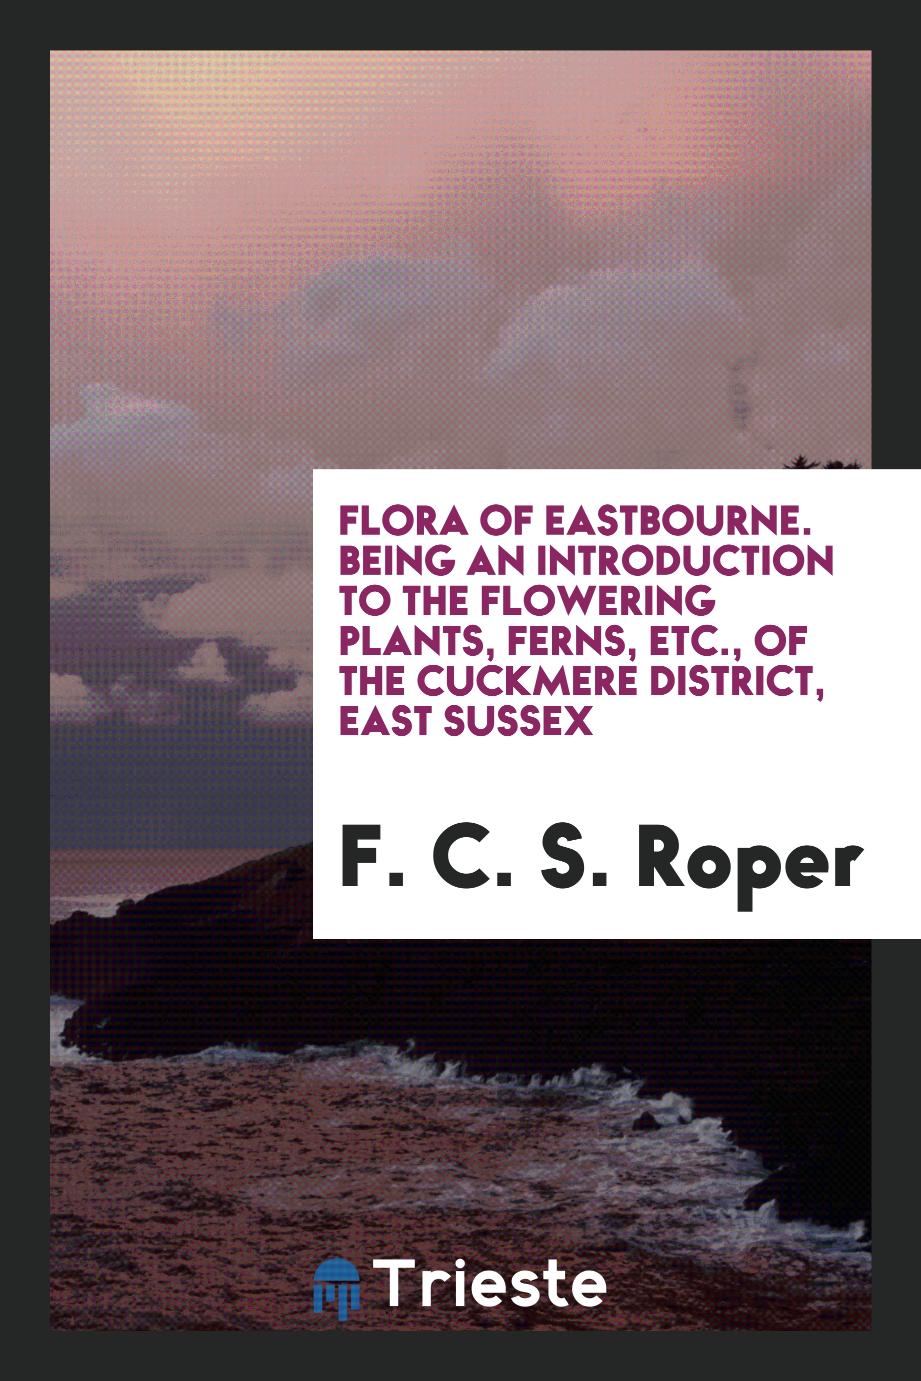 Flora of Eastbourne. Being an Introduction to the Flowering Plants, Ferns, Etc., of the Cuckmere District, East Sussex